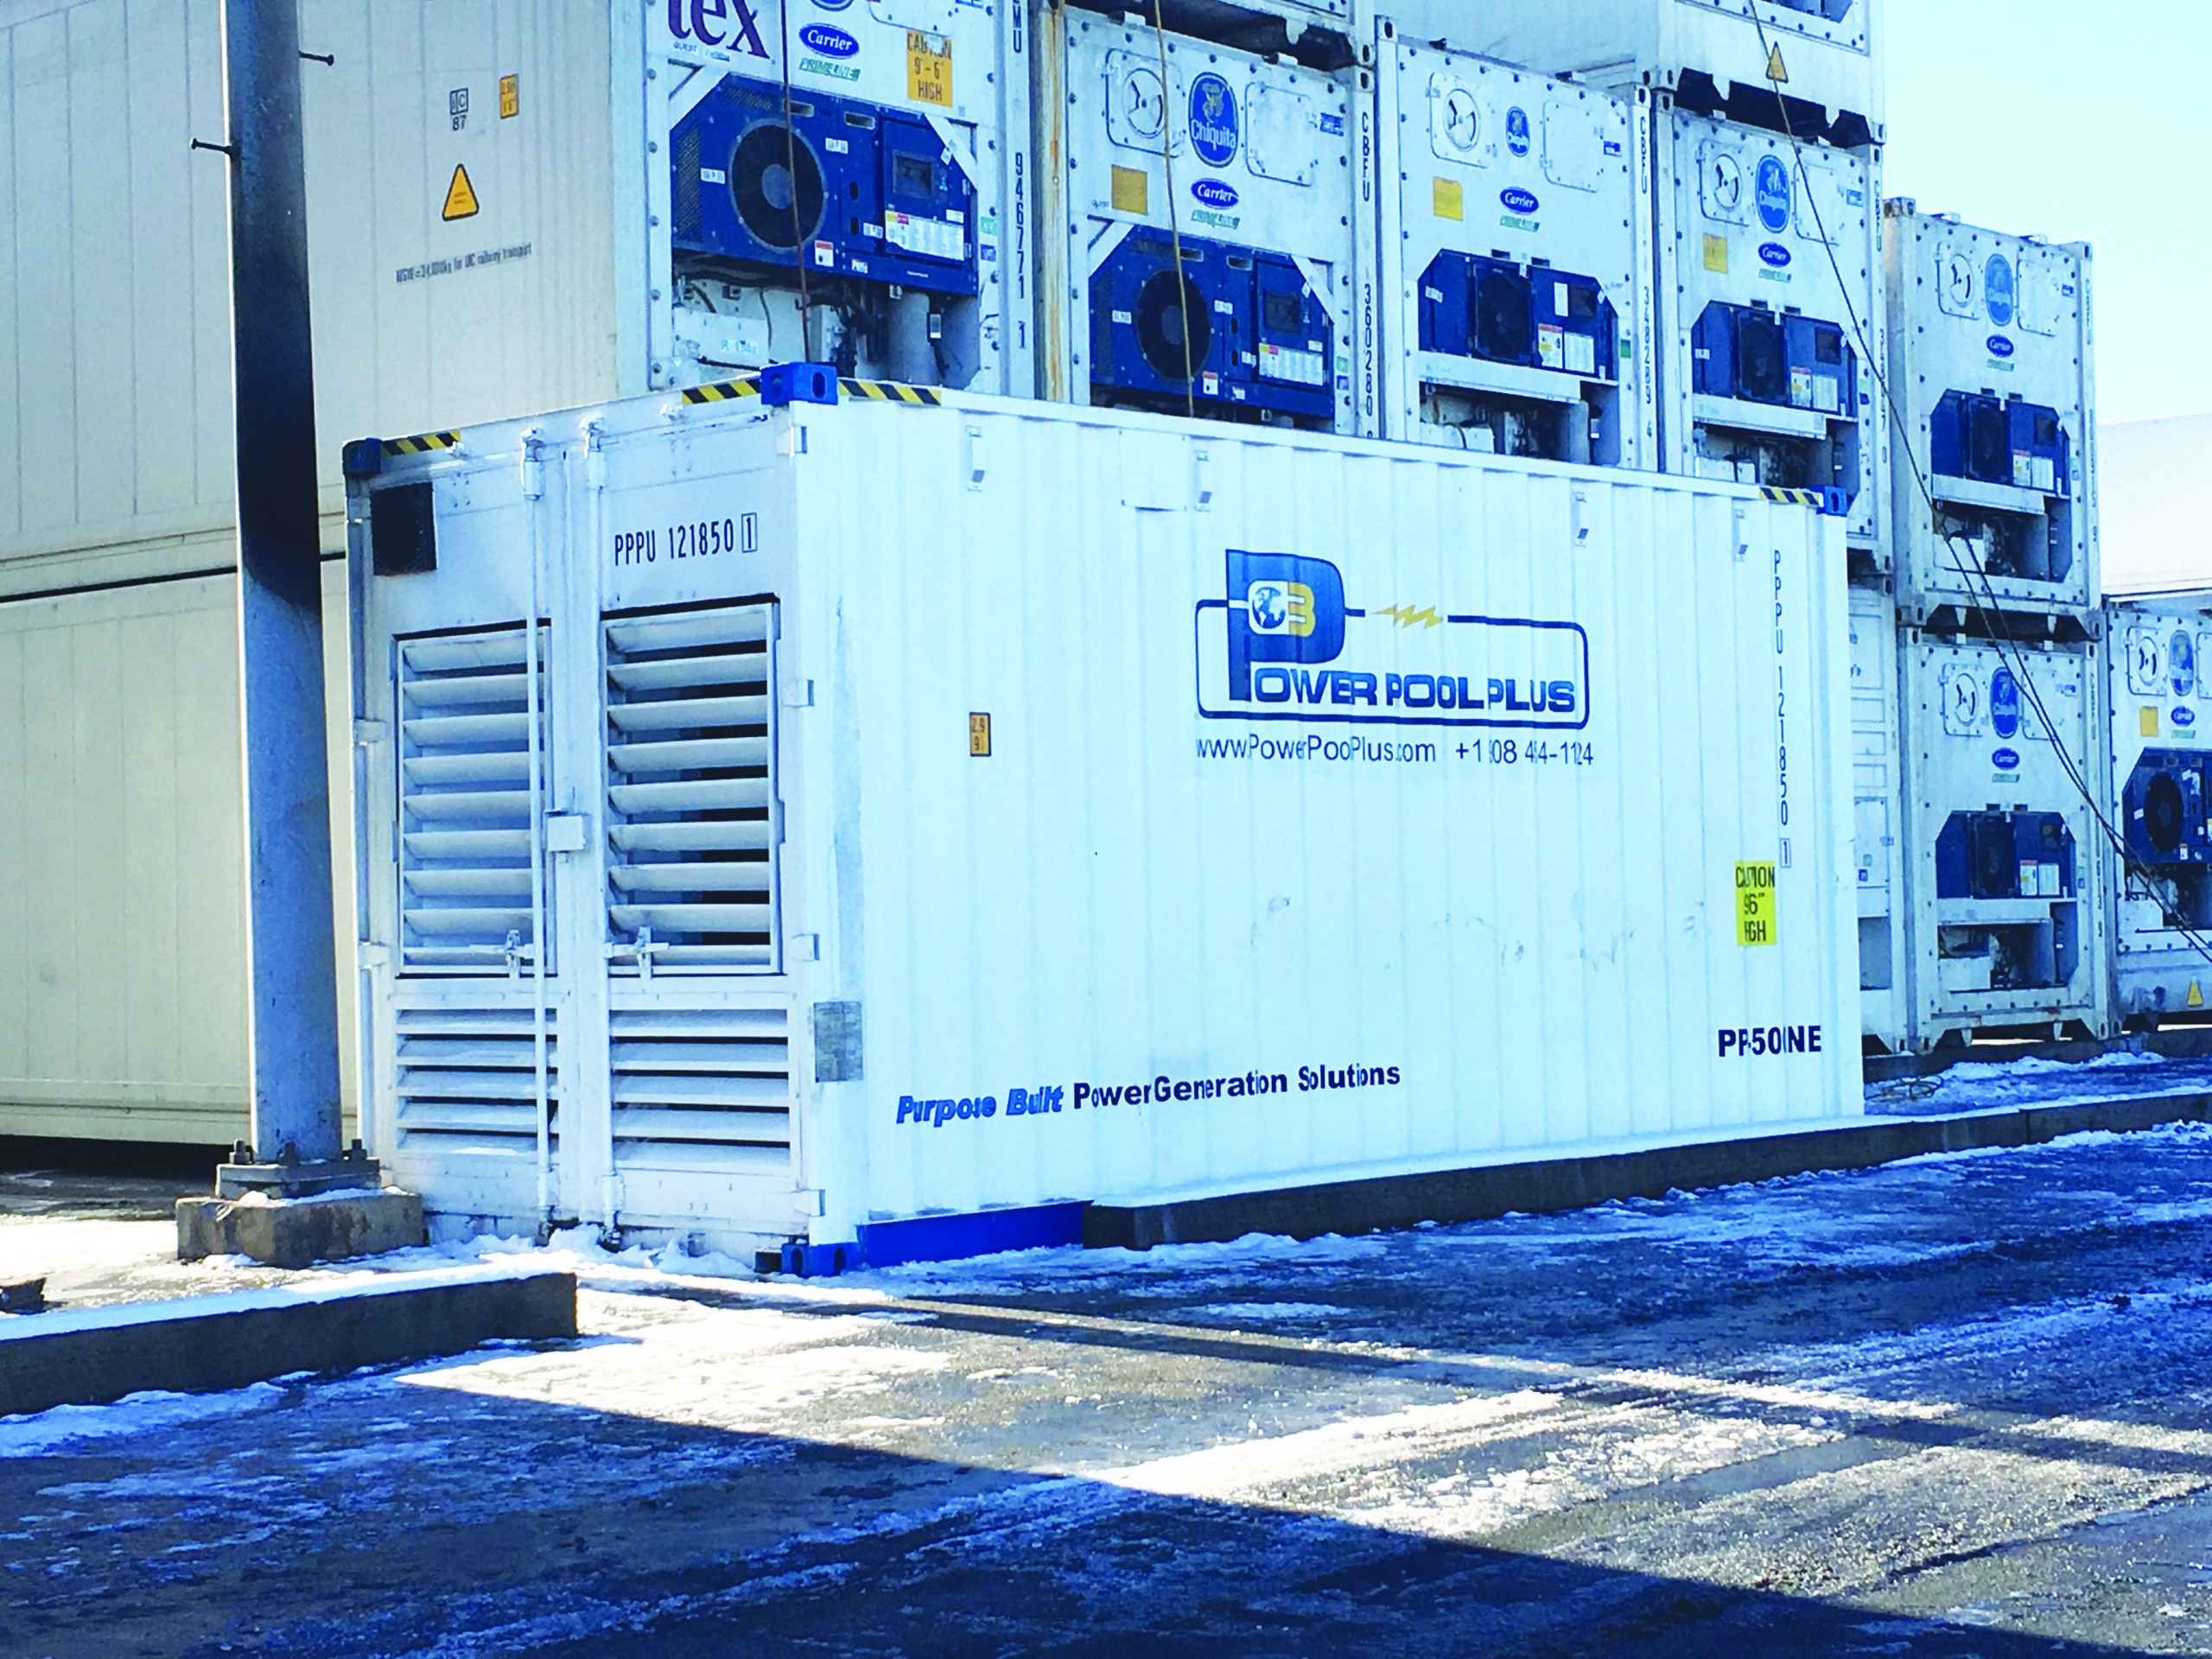 power pool plus cold-chain reefer generator